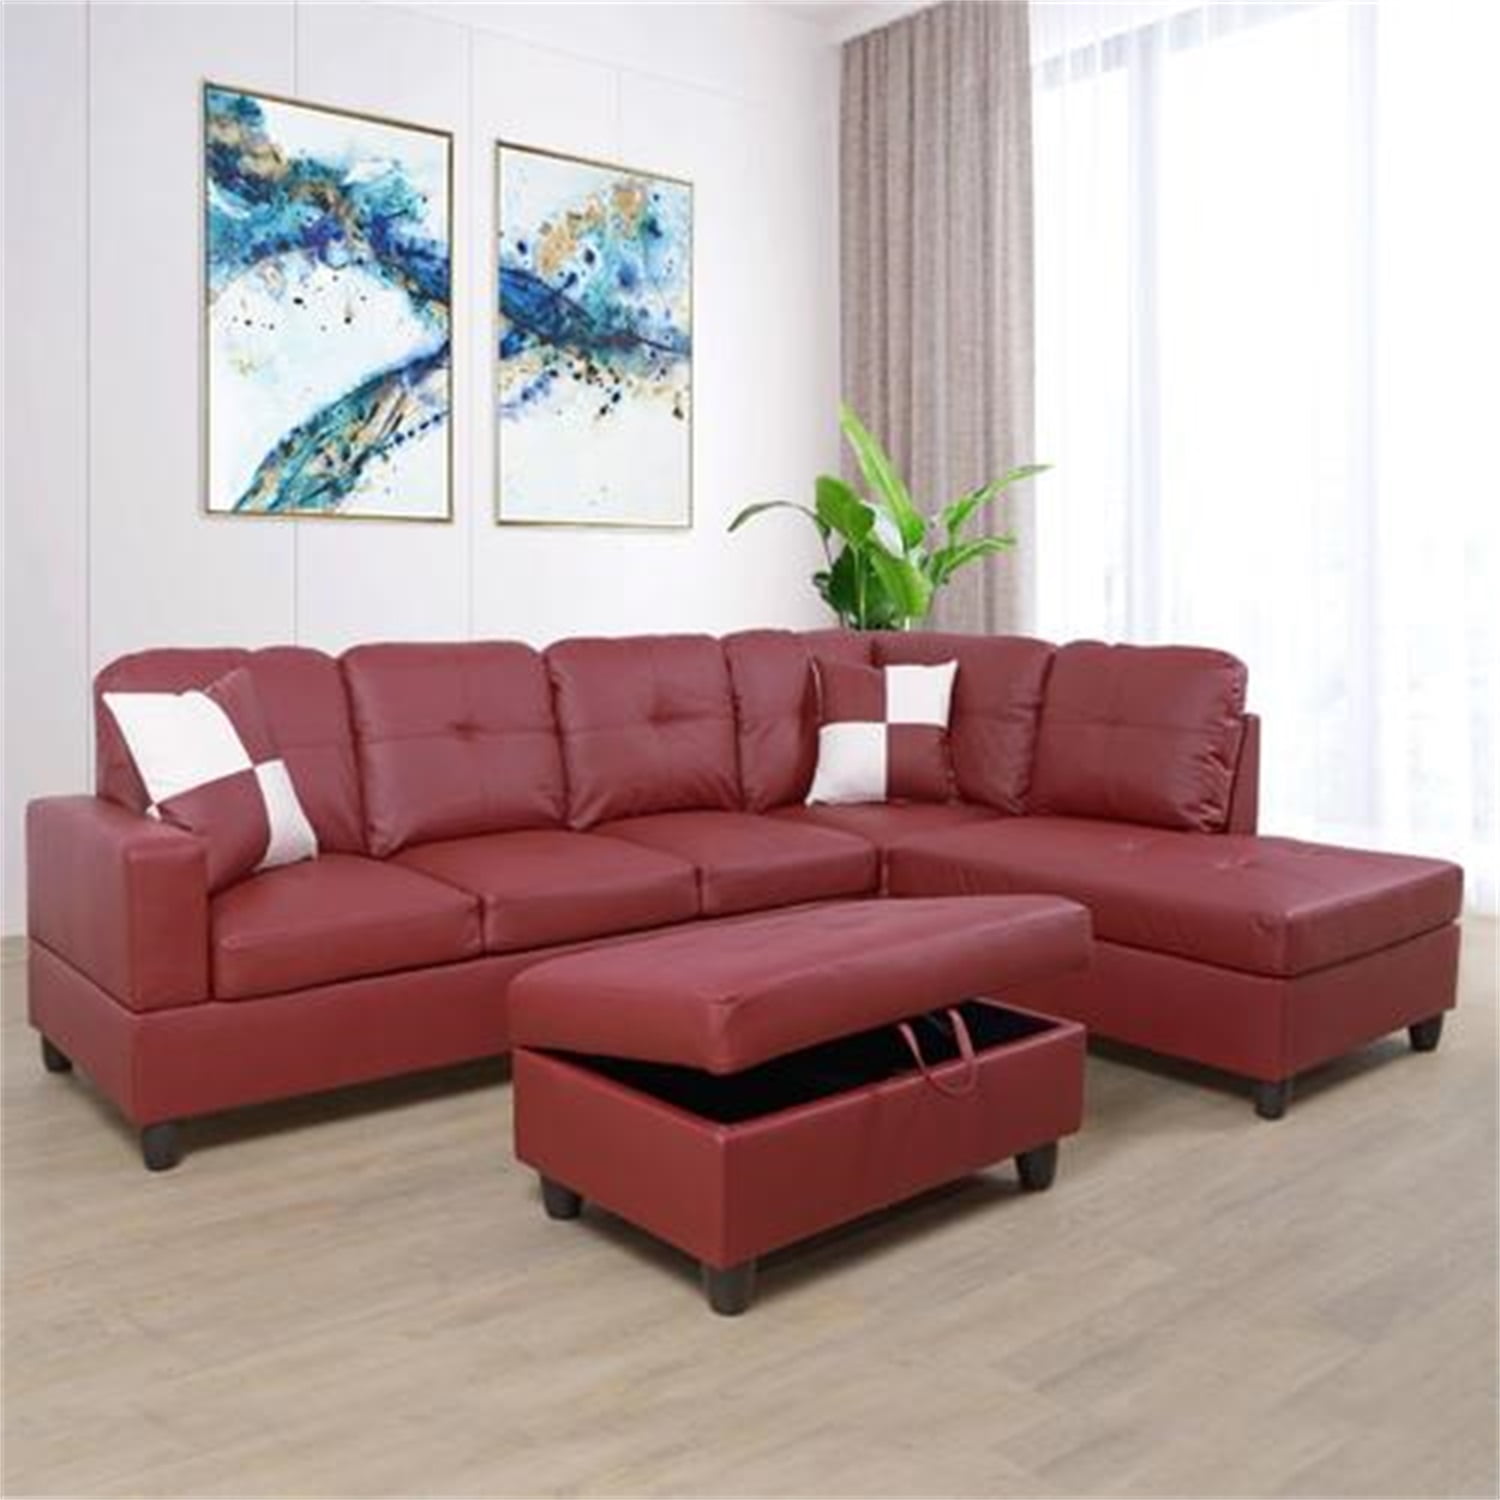 Hommoo Semi Pu Leather Sectional Sofa Couch Living Room Furniture Sets Modern L Shaped Set Red No Ottoman Com